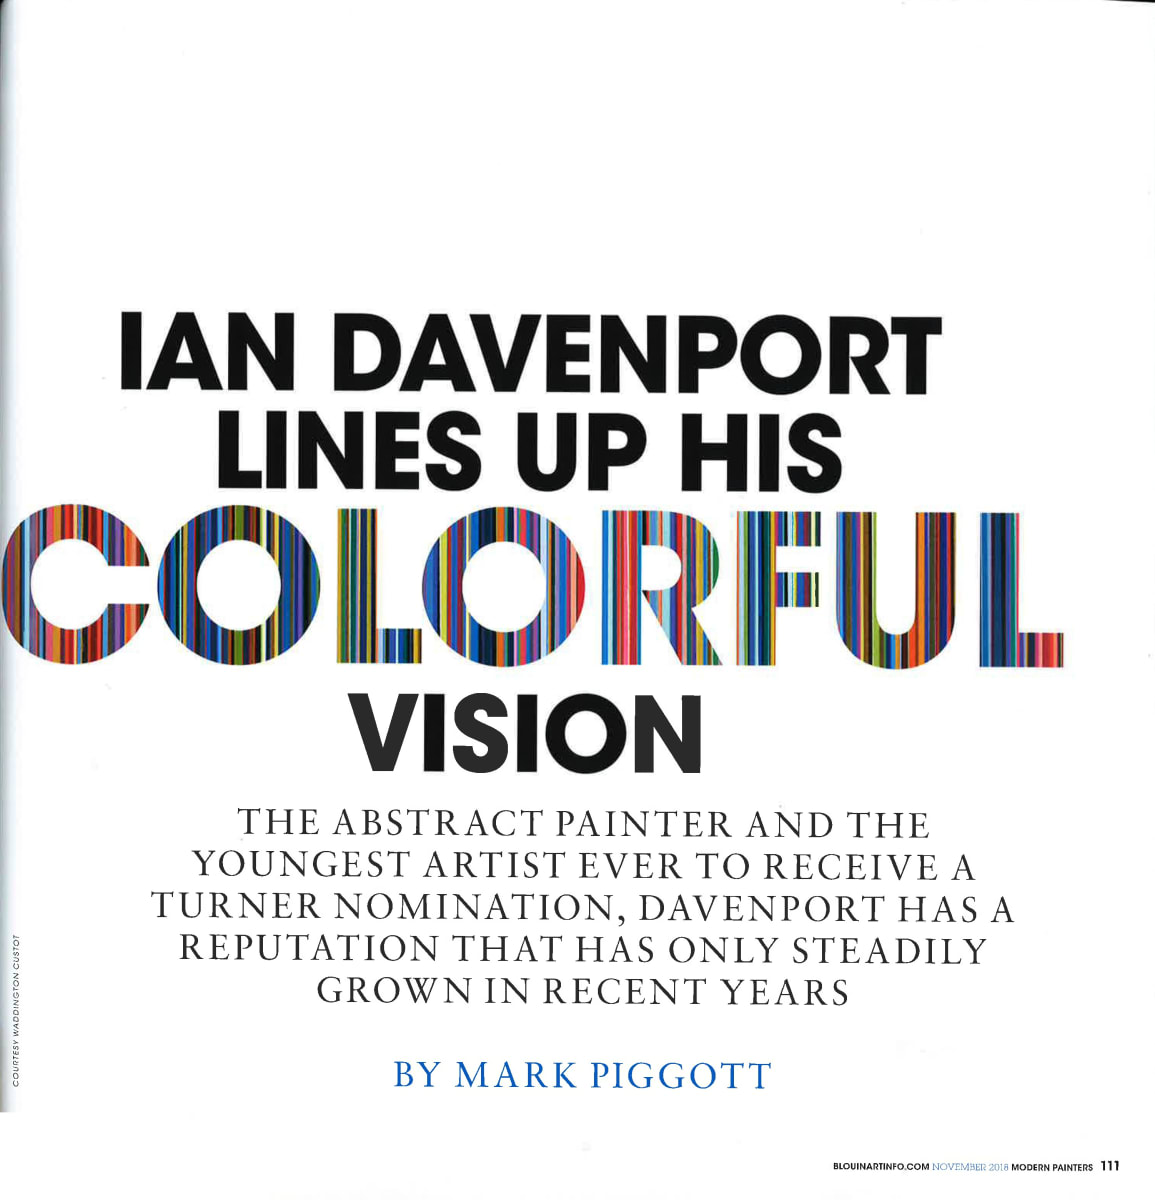 Ian Davenport Lines Up his Colourful Vision Part 1